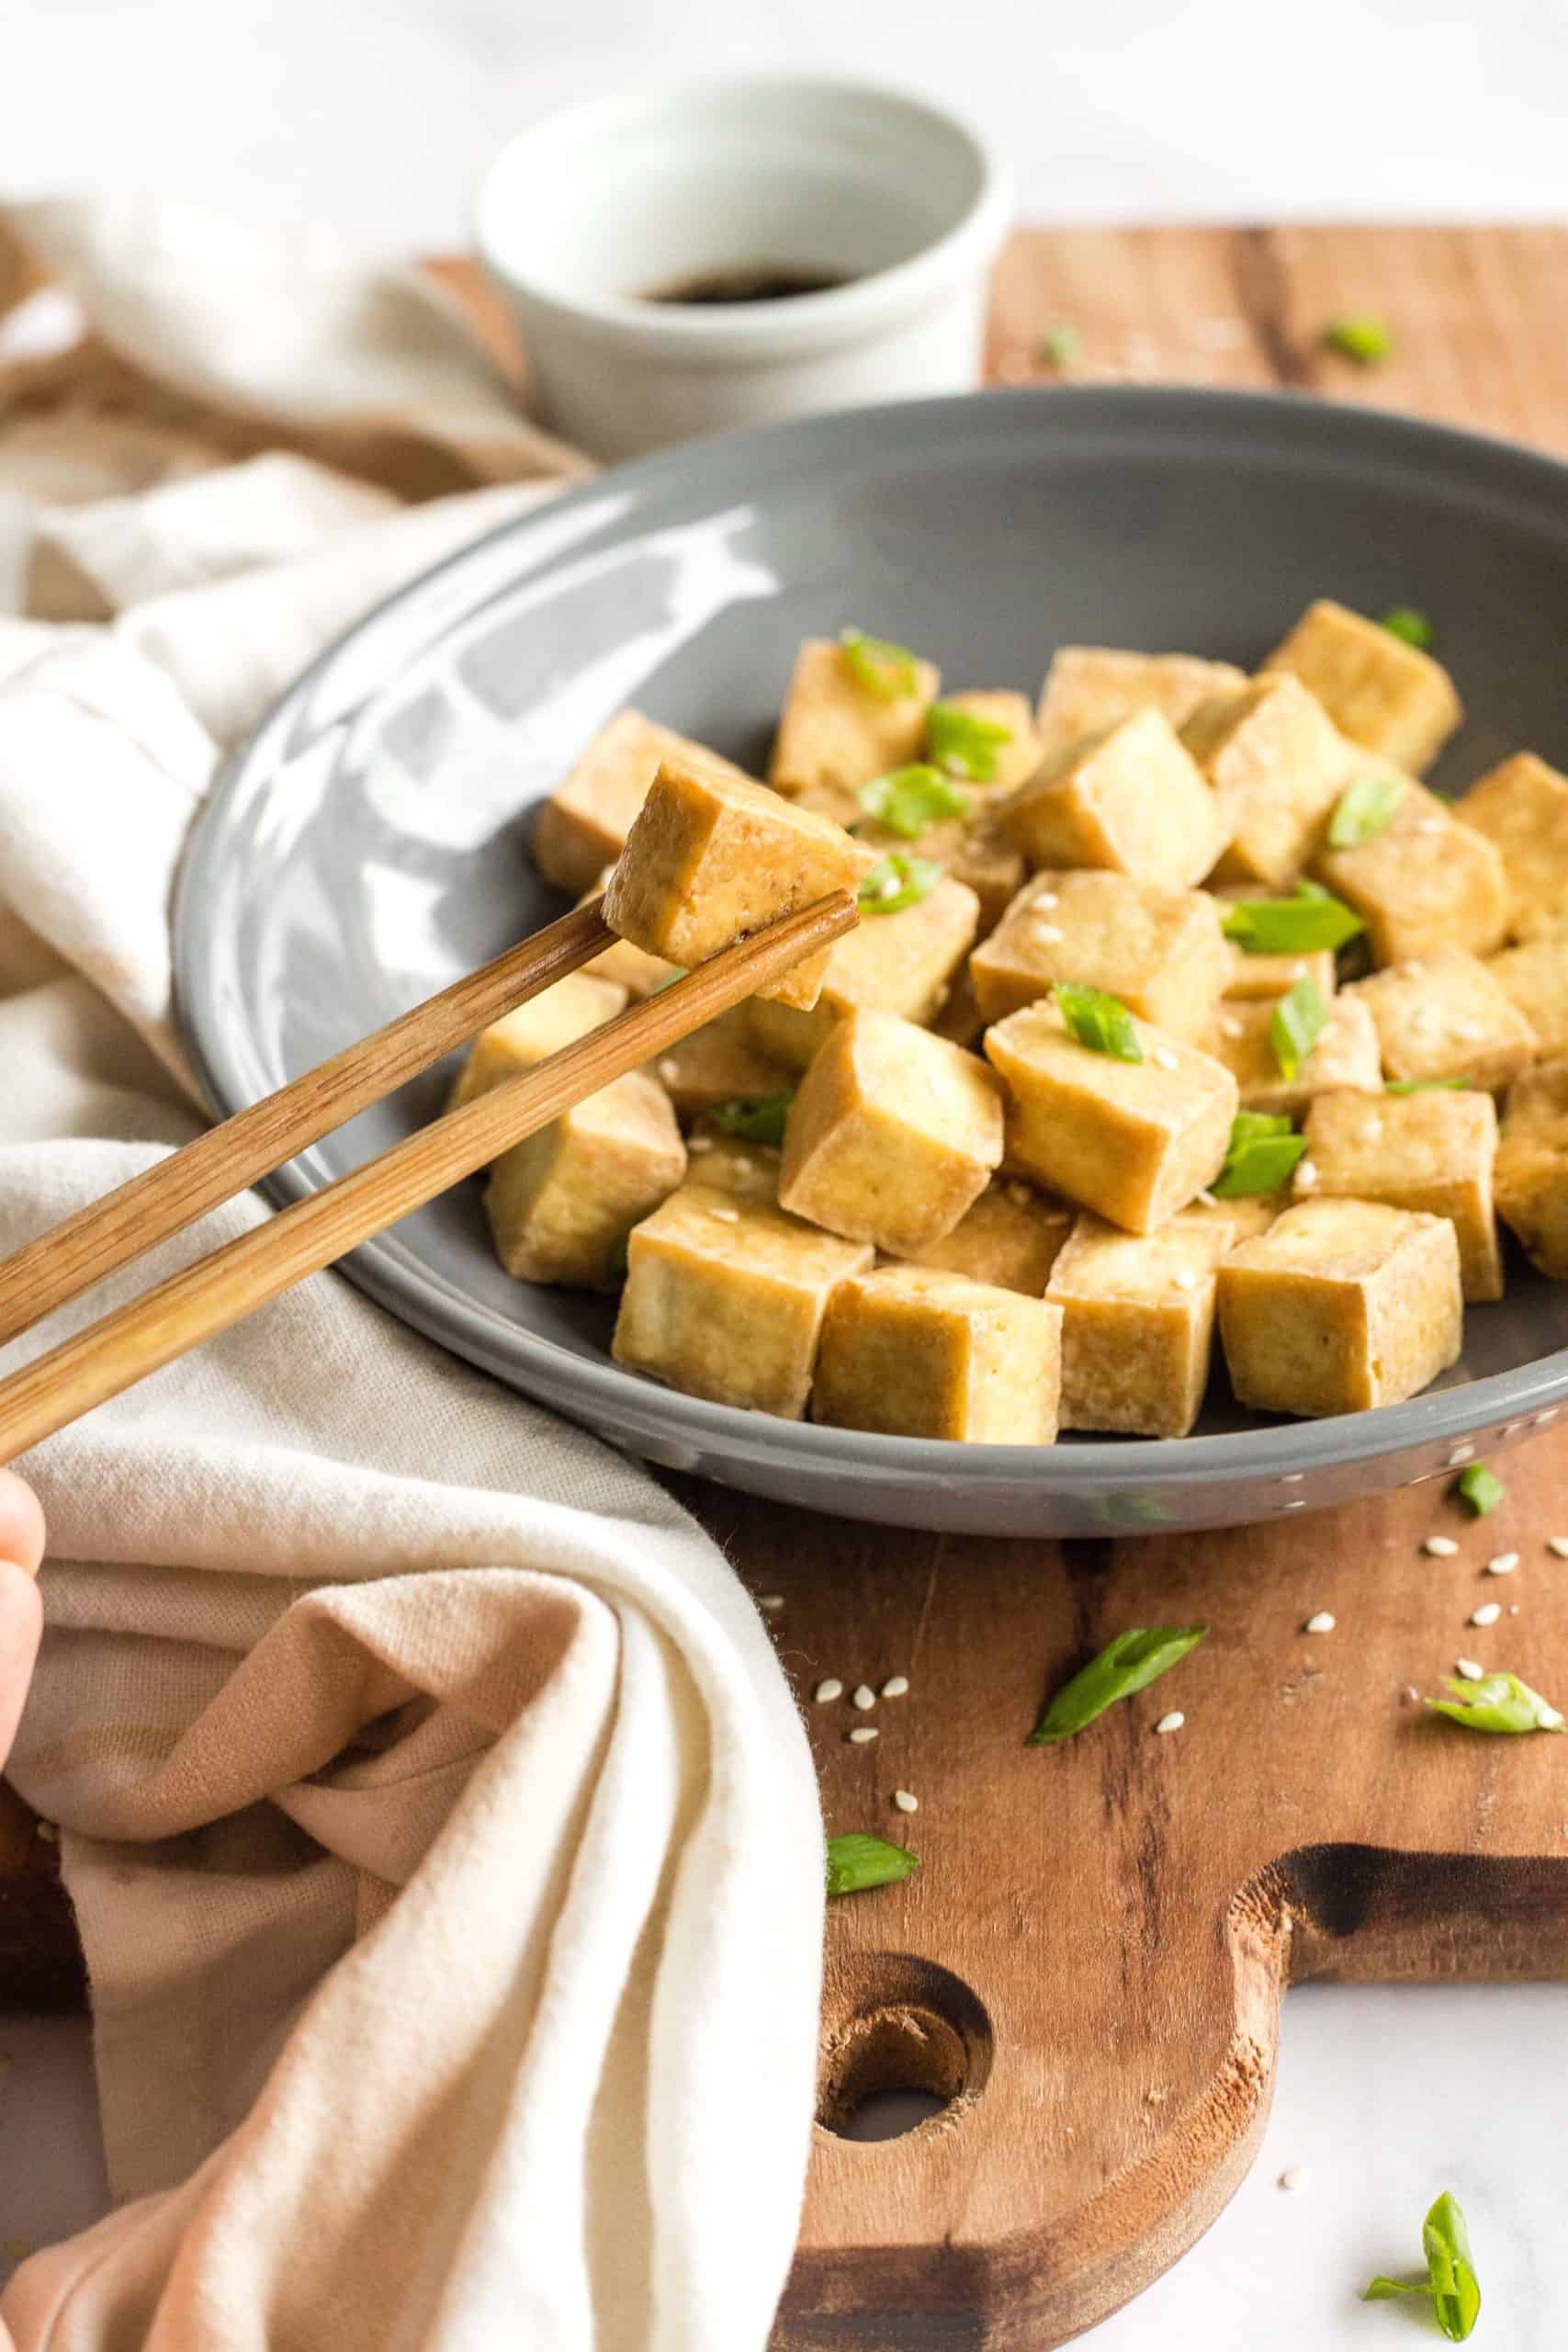 A pair of chopsticks picking up a tofu cube from a bowl.